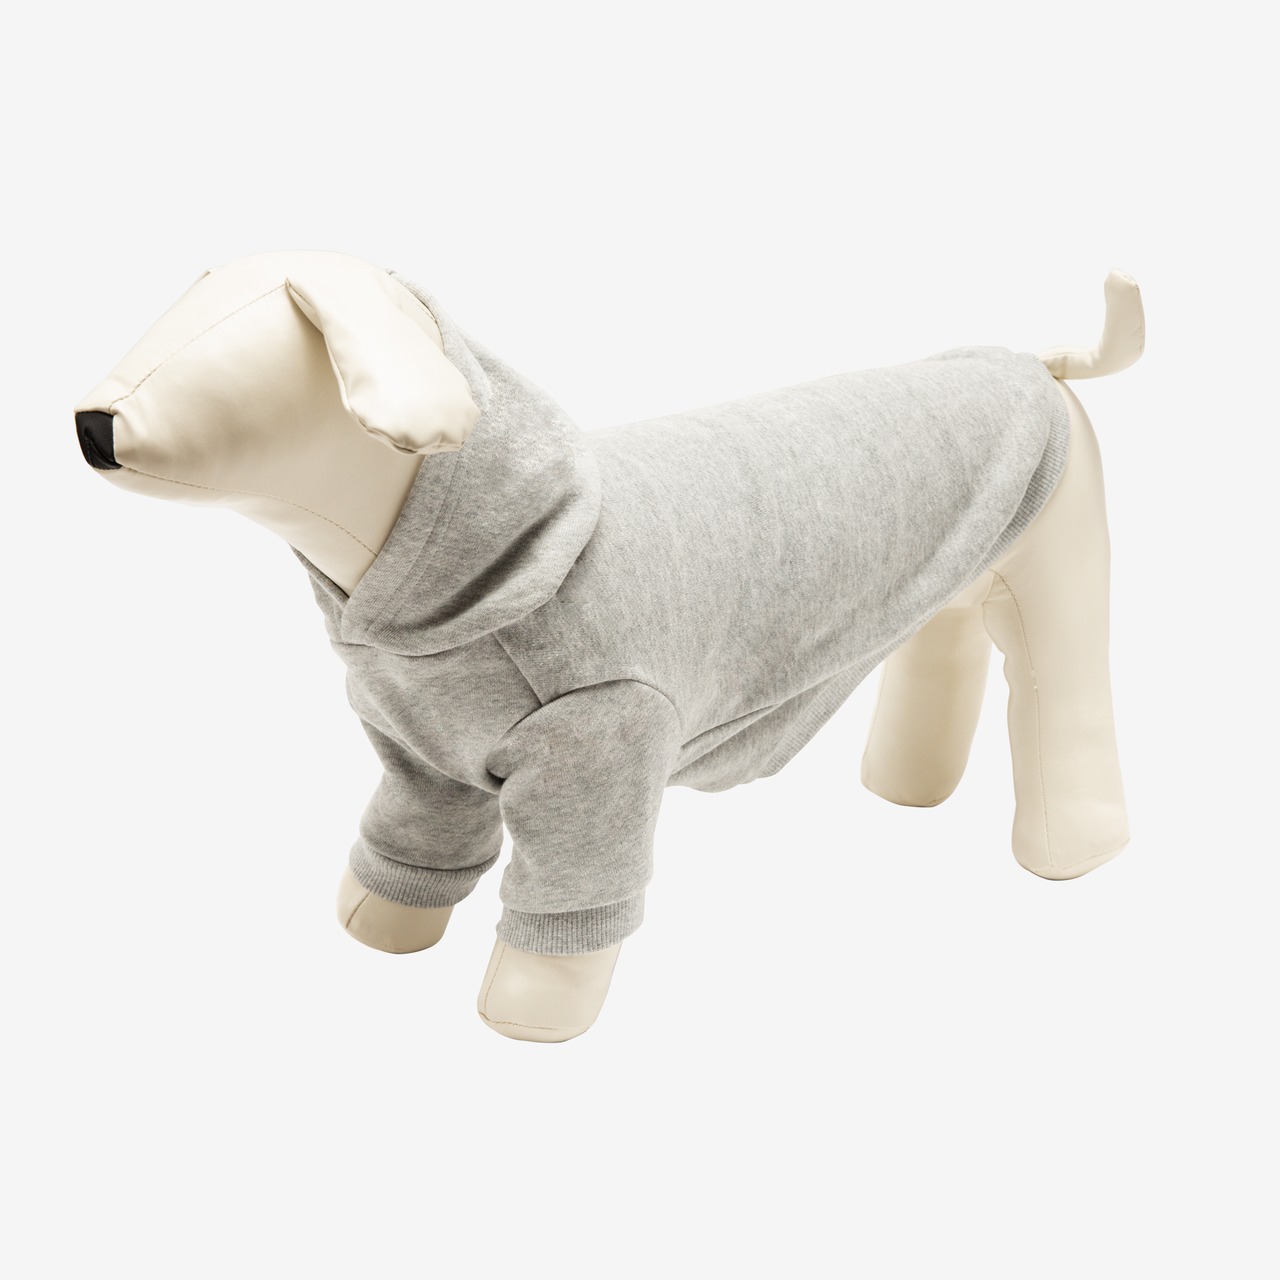 PET HARF SLEEVE FRENCH TERRY PARKA WHITE